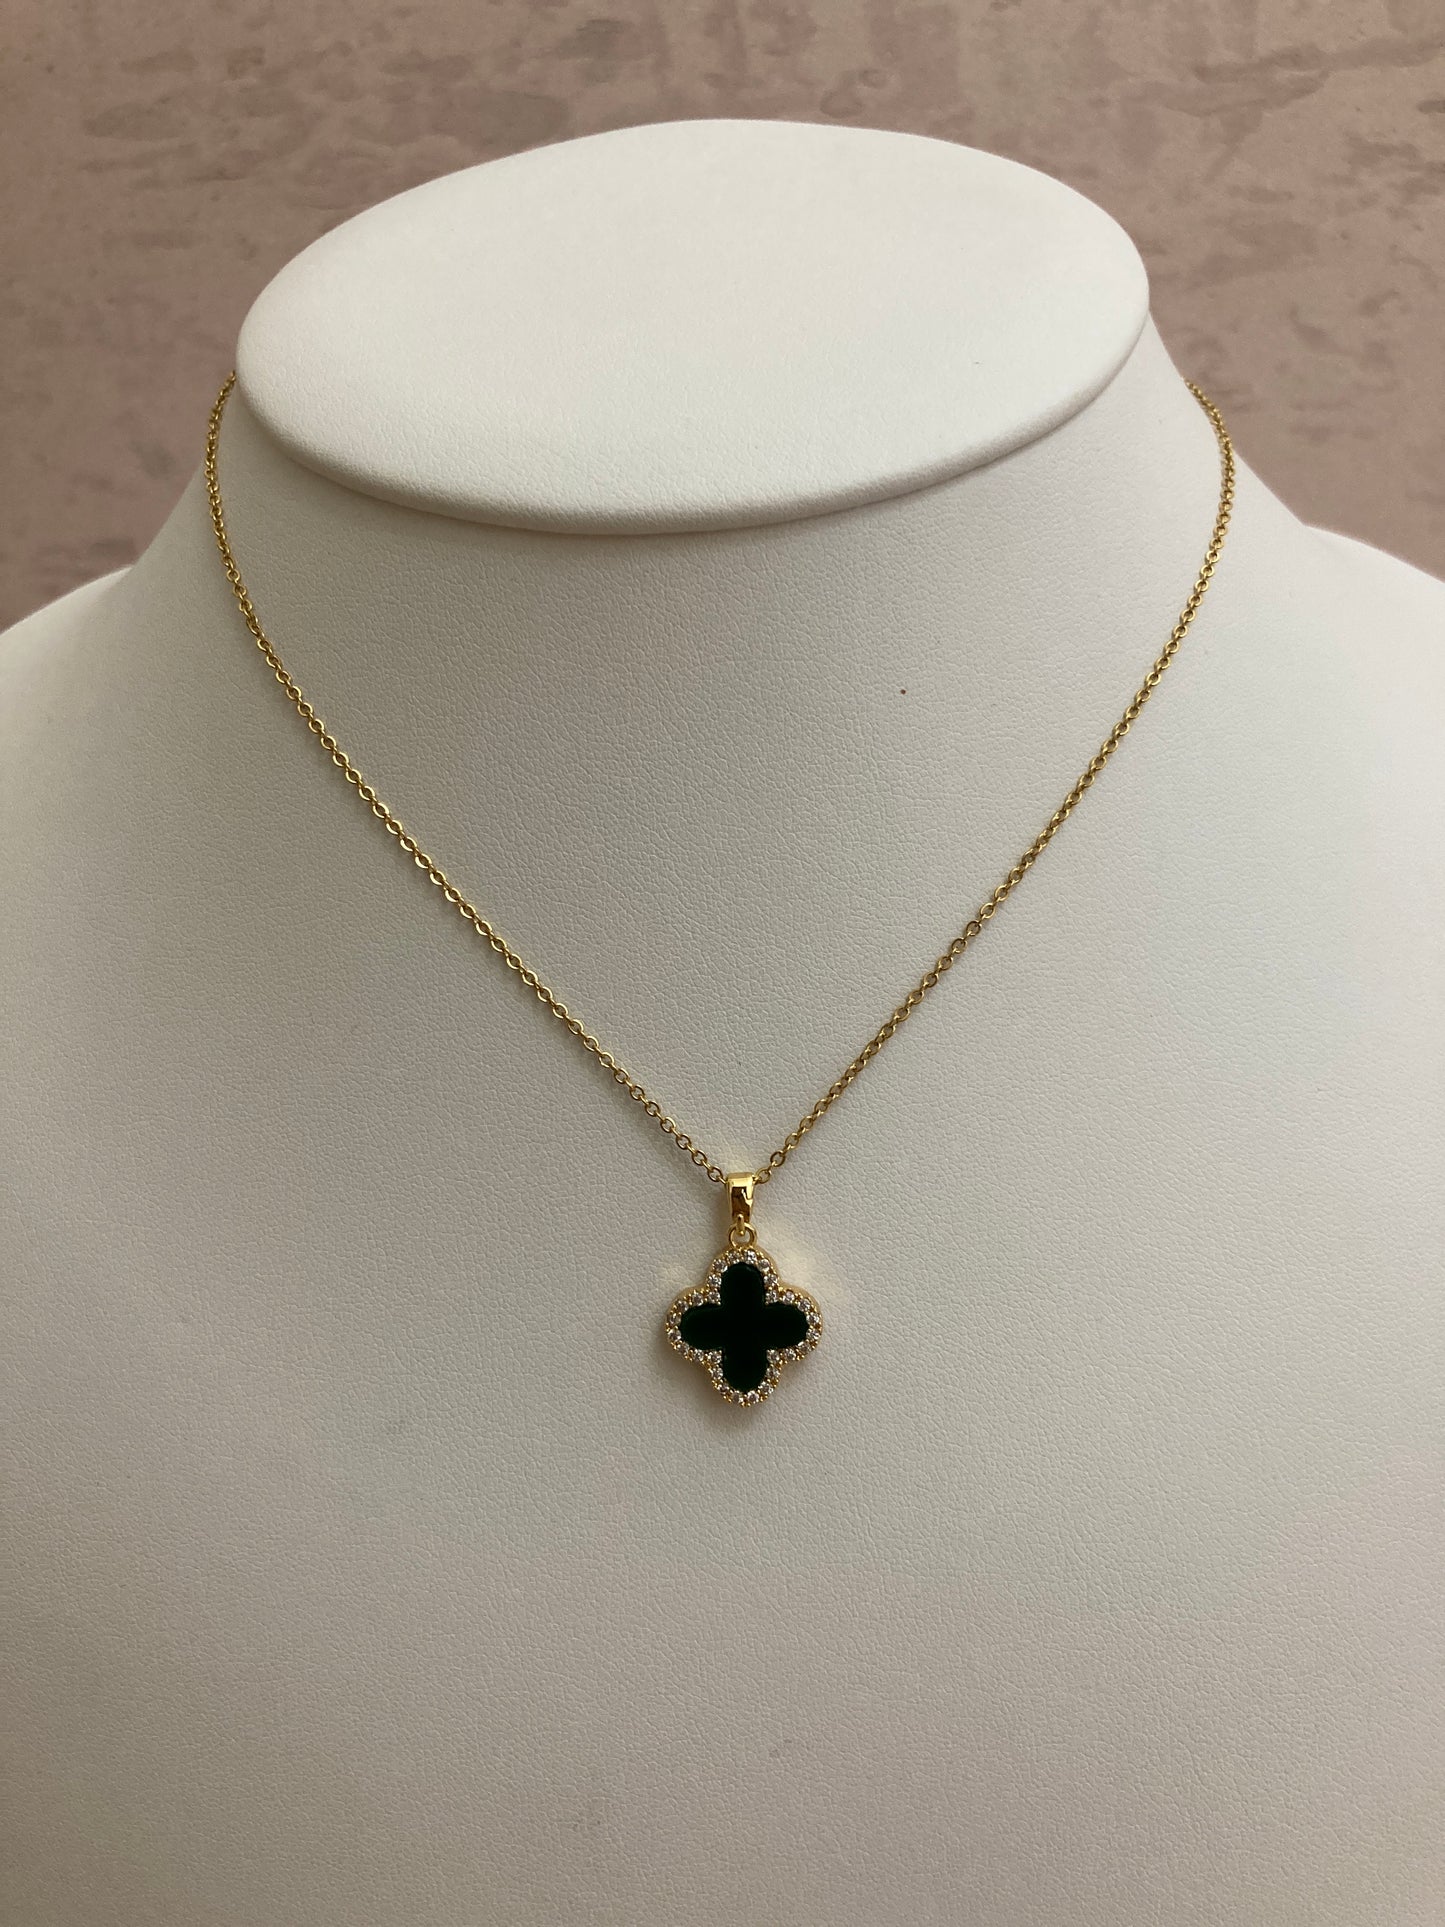 Double Sided Single Clover Necklace (ST822) (Emerald Black)